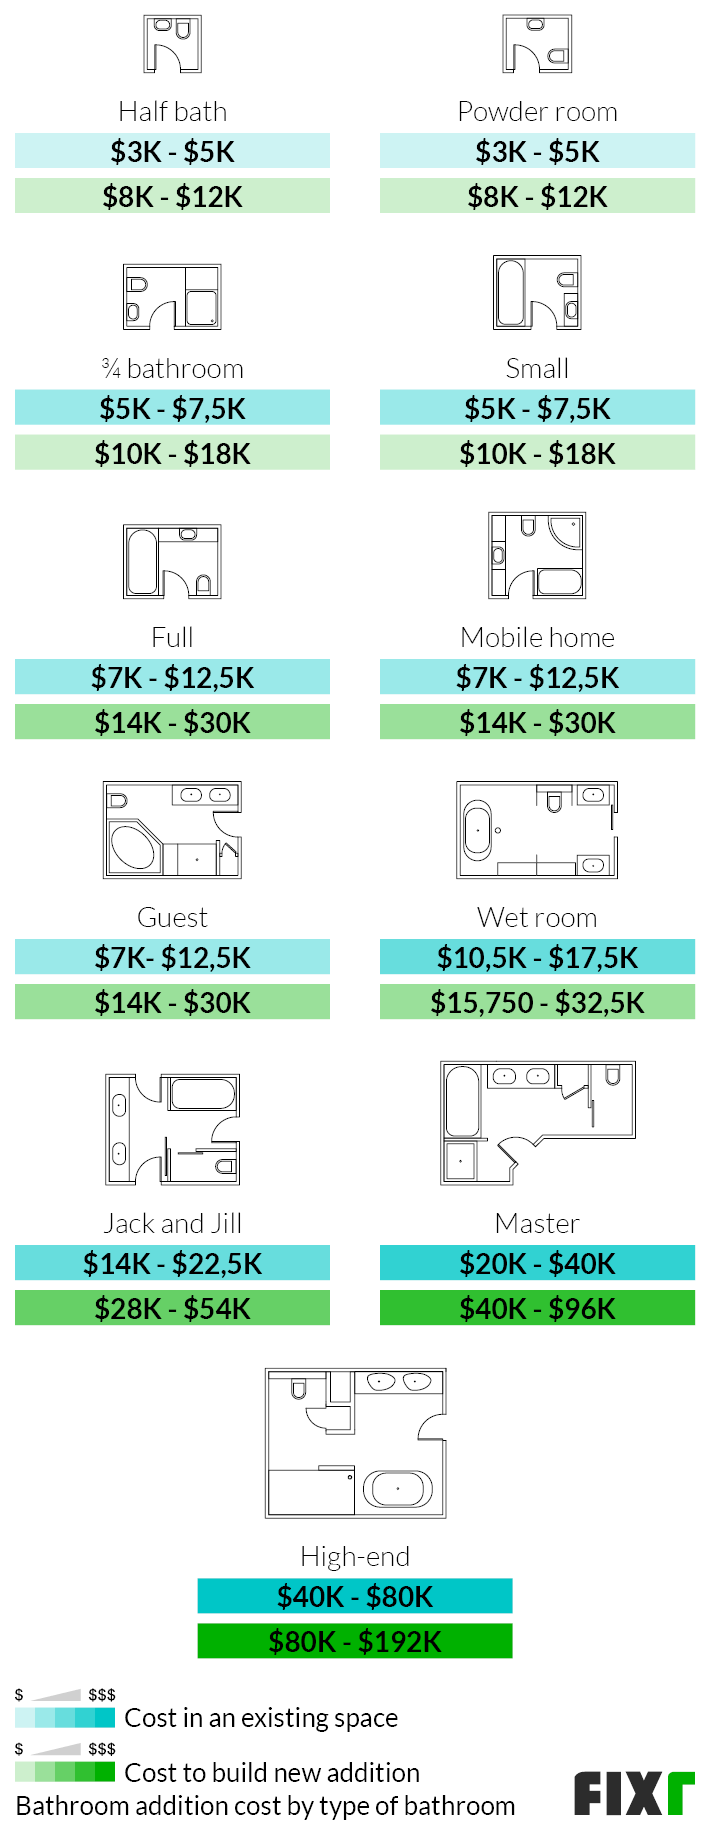 Bathroom Addition Cost, How Much It Cost To Add A Bathroom House